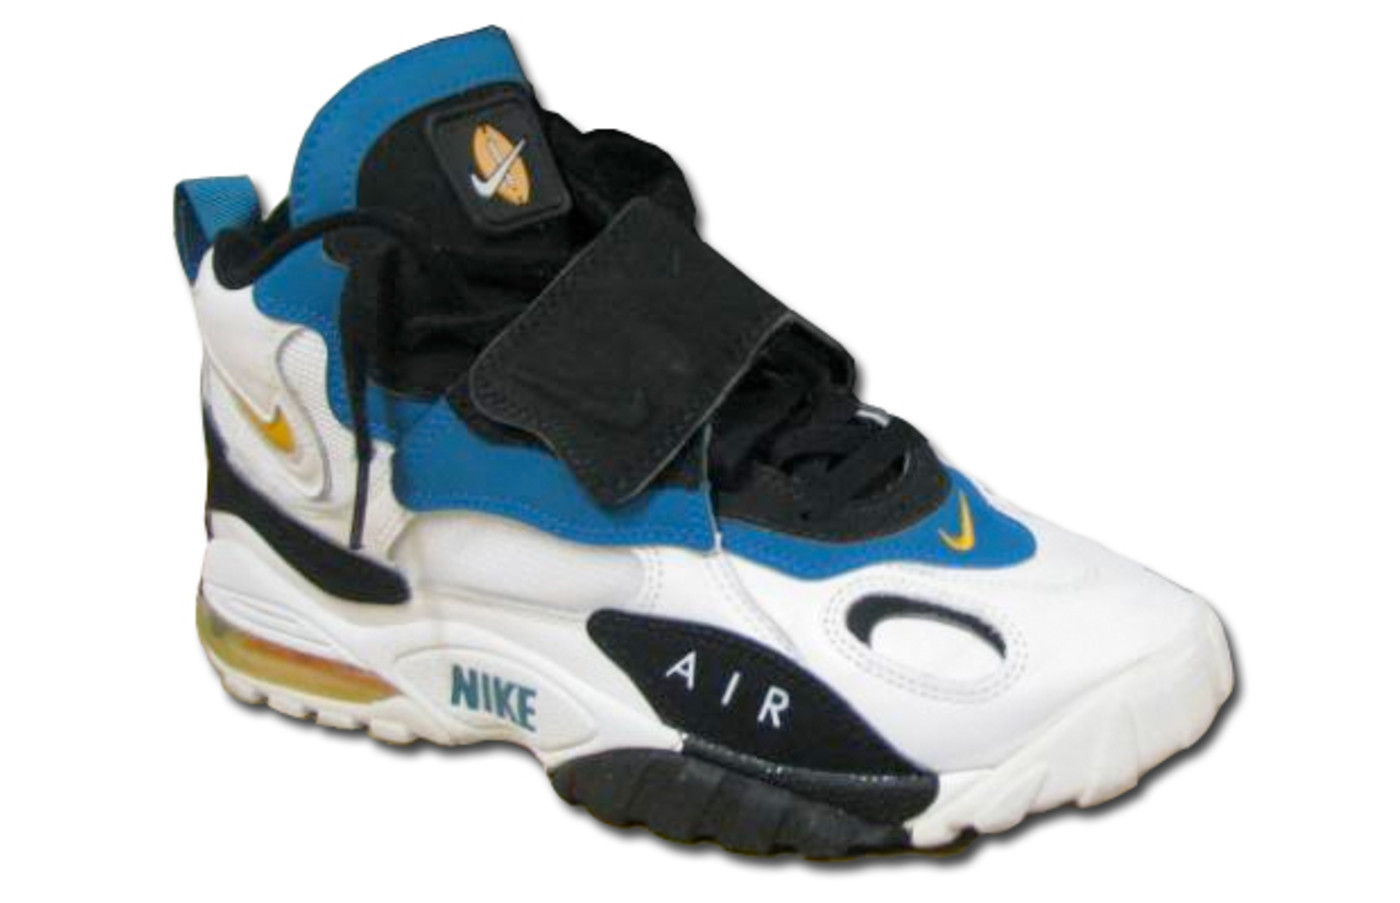 nike shoes with rubber straps